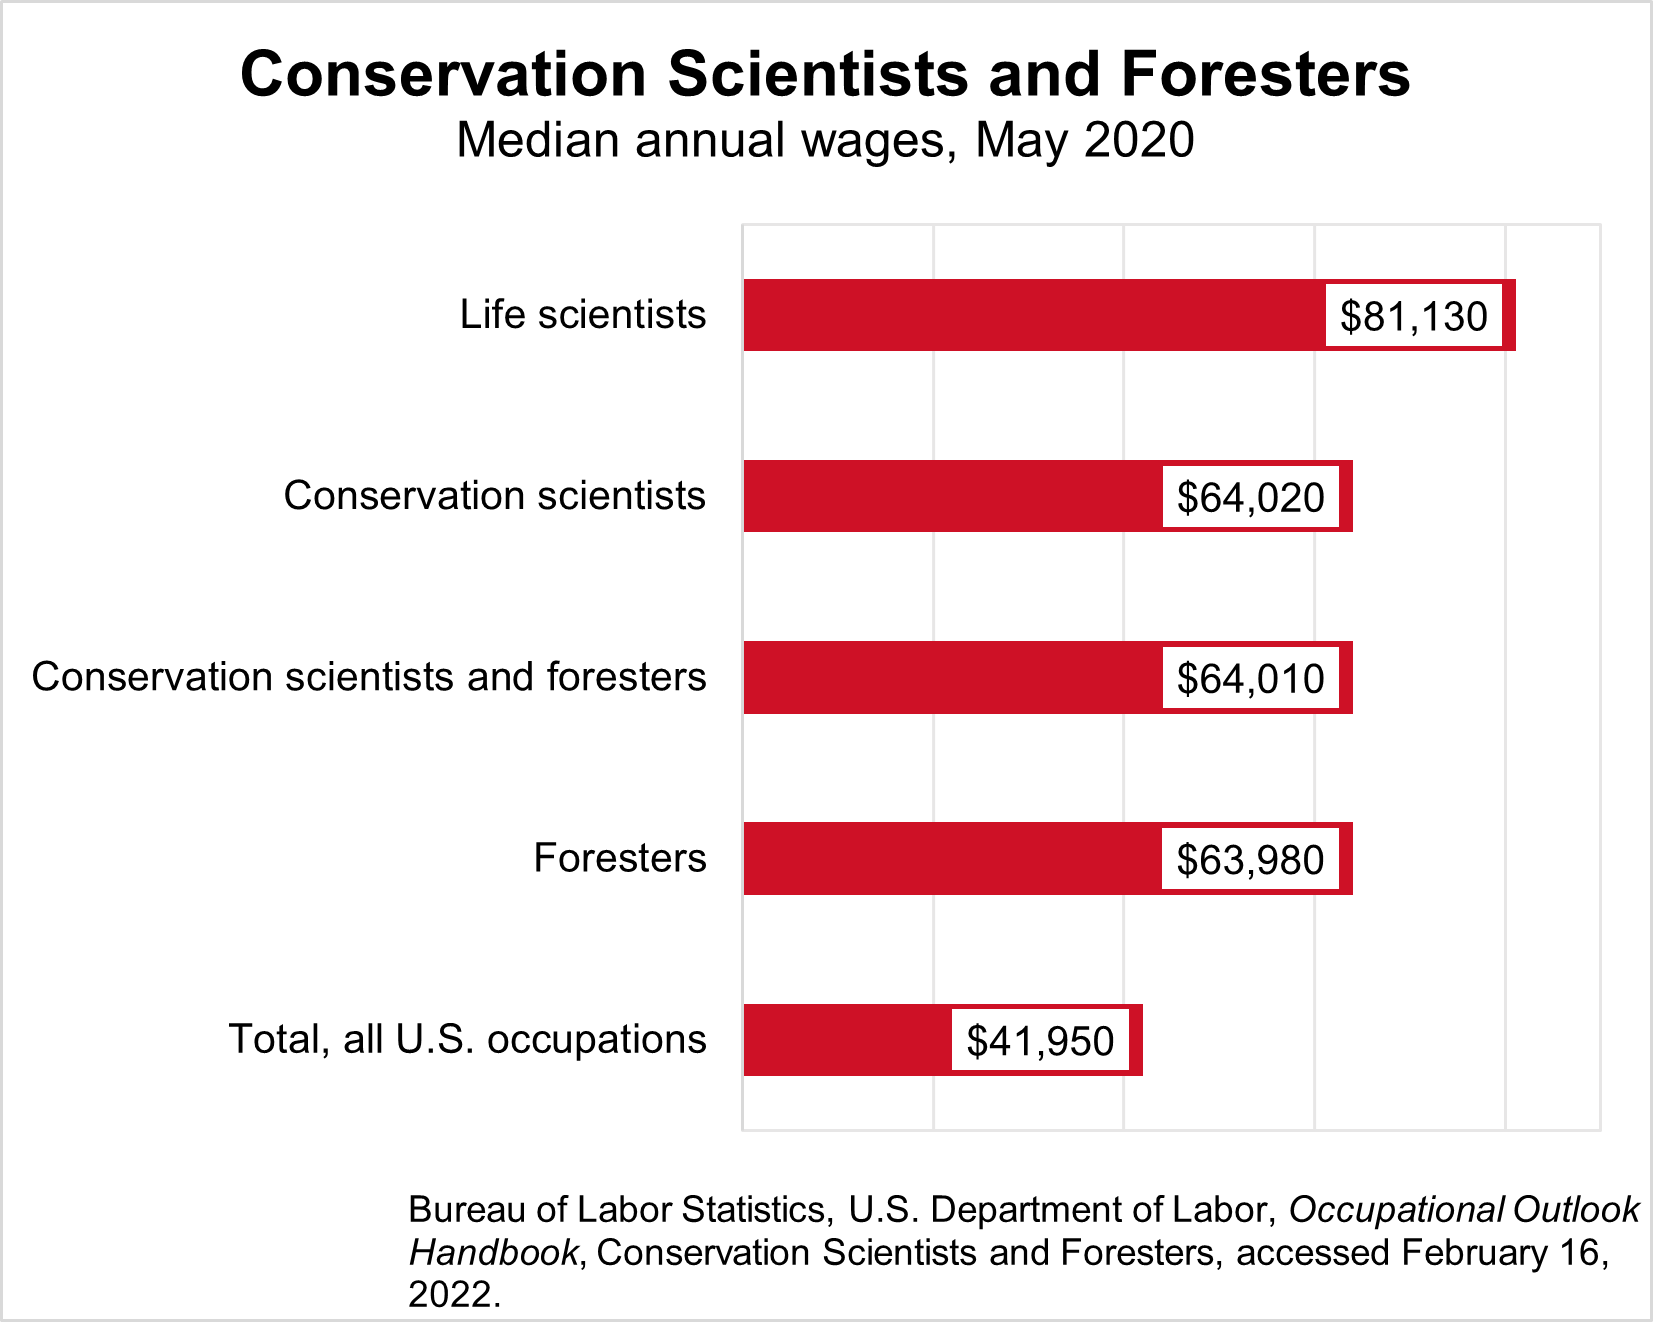 The median annual wages for conservation scientists and foresters and related occupations in May 2020 was: life scientists ($81,130), conservation scientists ($64,020), conservation scientists and foresters ($64,010), foresters ($63,980). The total for all U.S. occupations was $41,950.  Source: Bureau of Labor Statistics, U.S. Department of Labor, Occupational Outlook Handbook, Conservation Scientists and Foresters, accessed February 16, 2022.